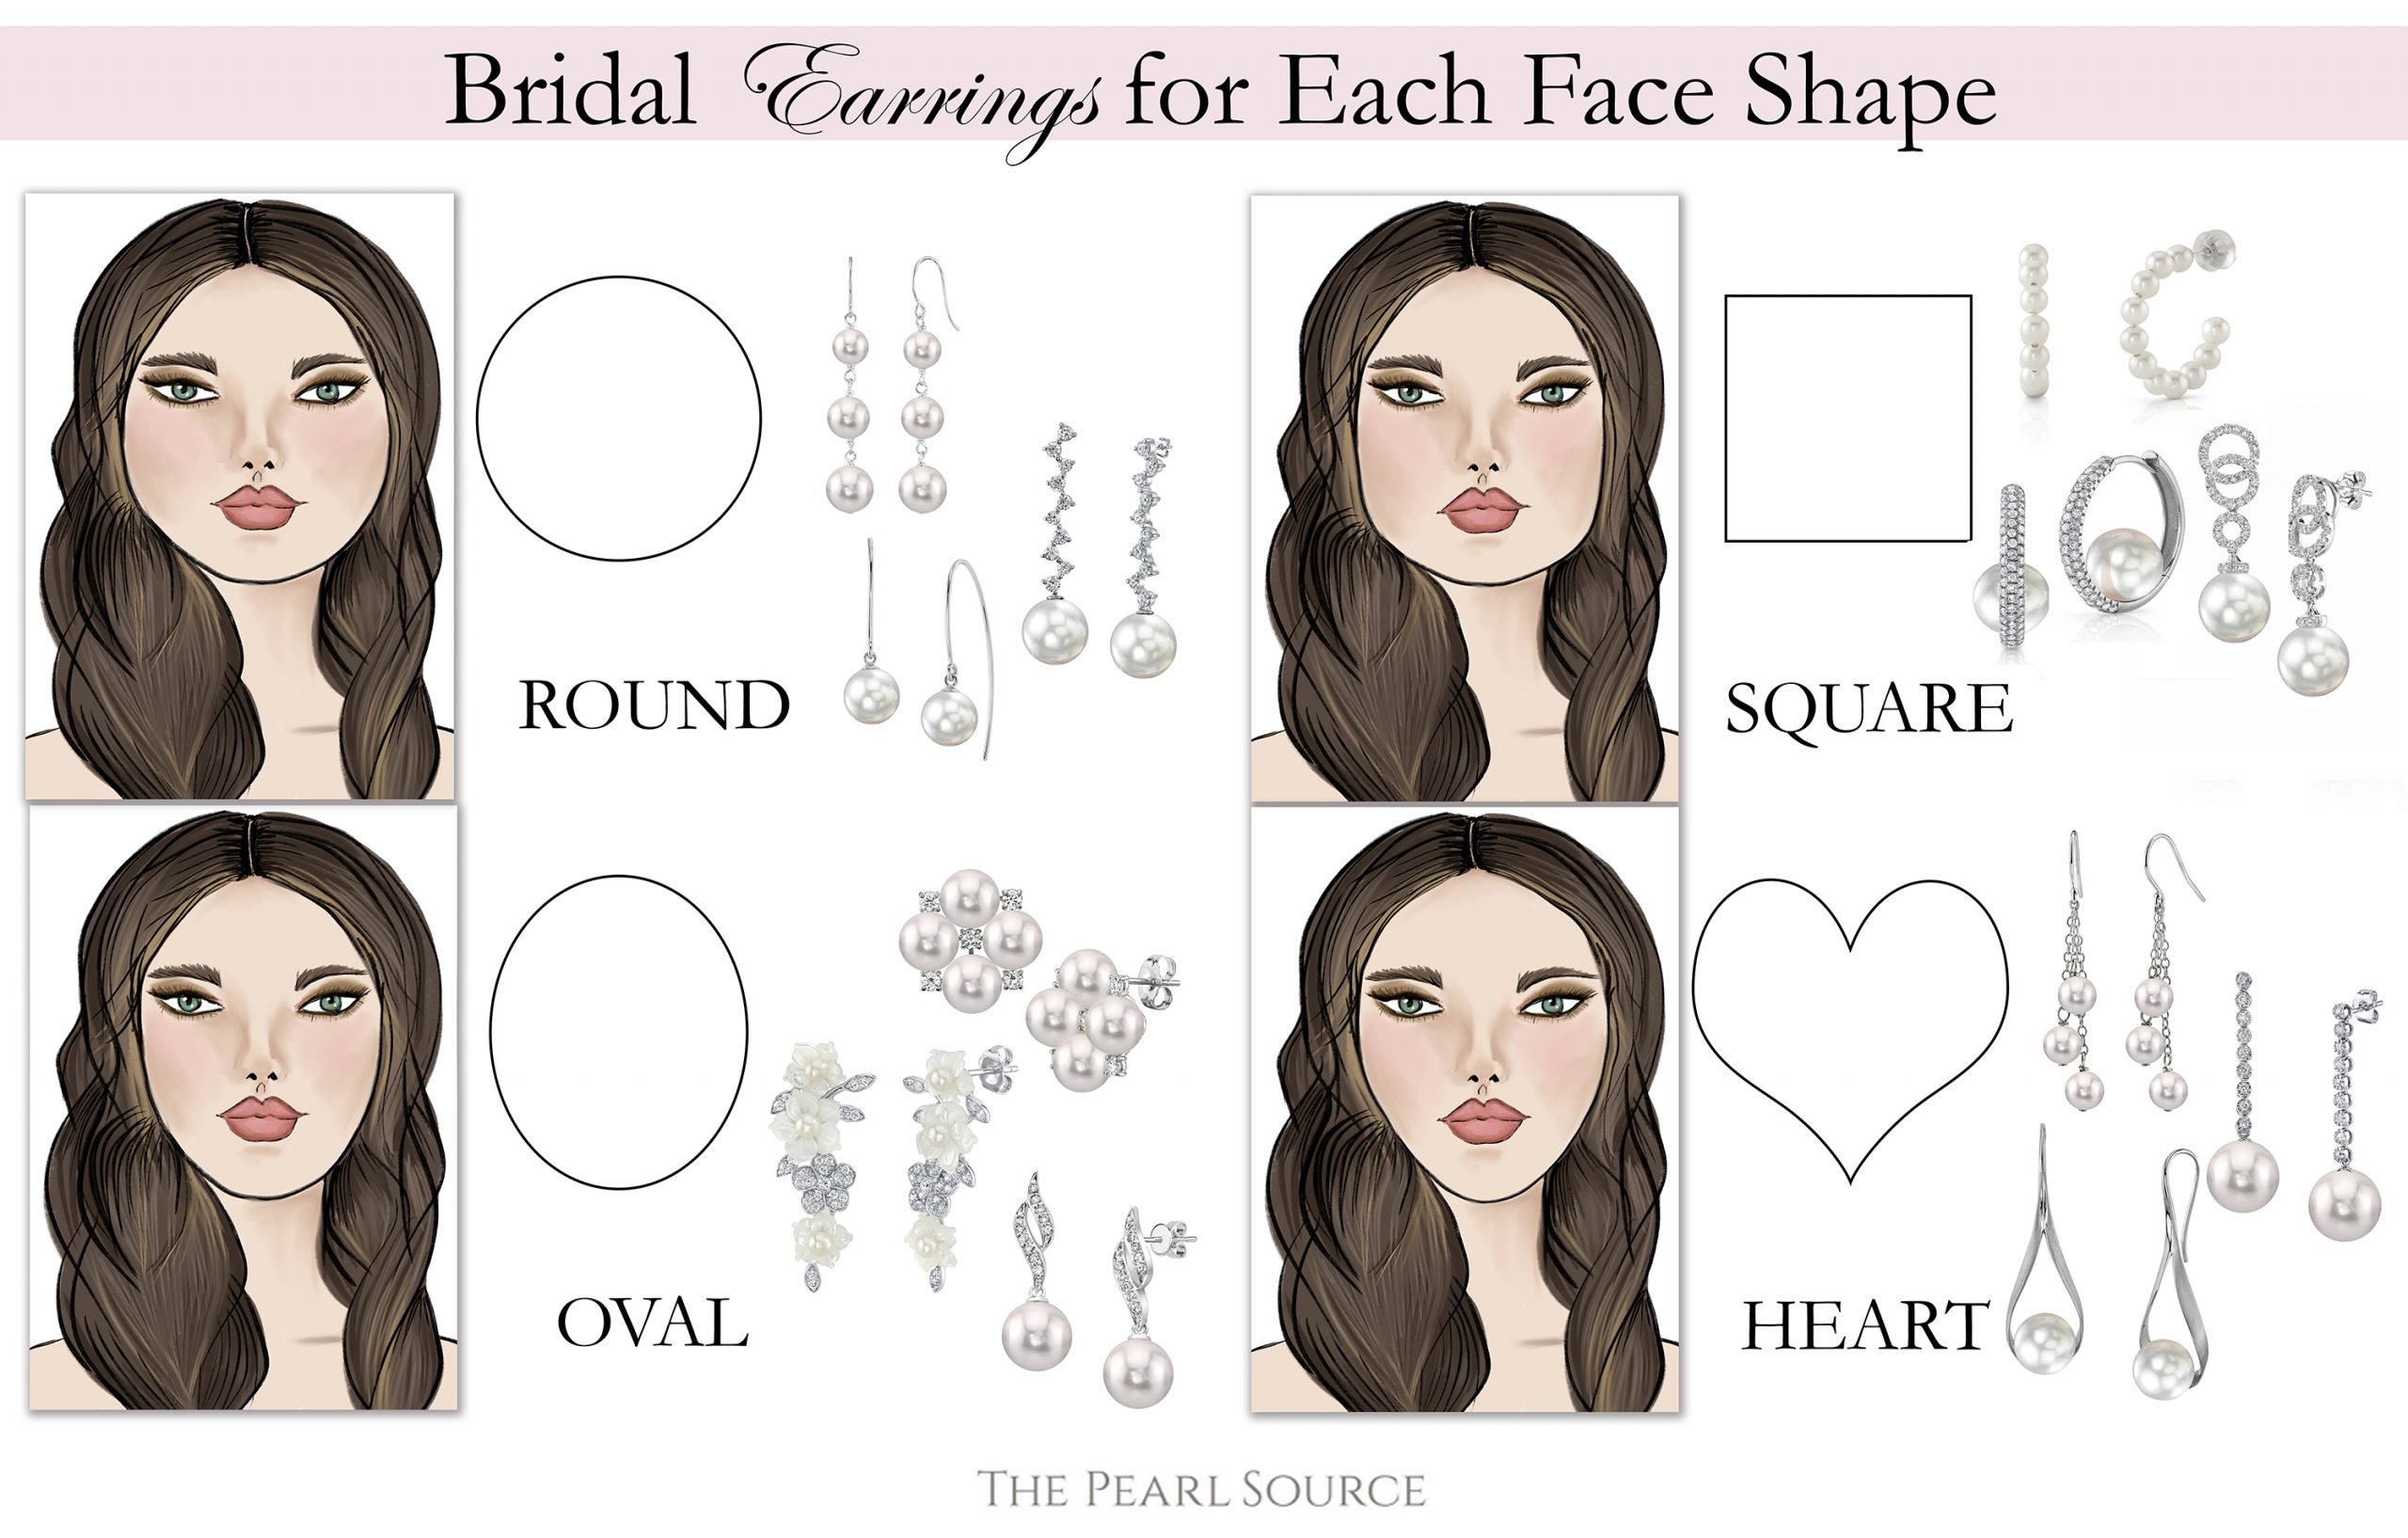 How To Choose The Right Bridal Hairstyles For Different Face Shapes?